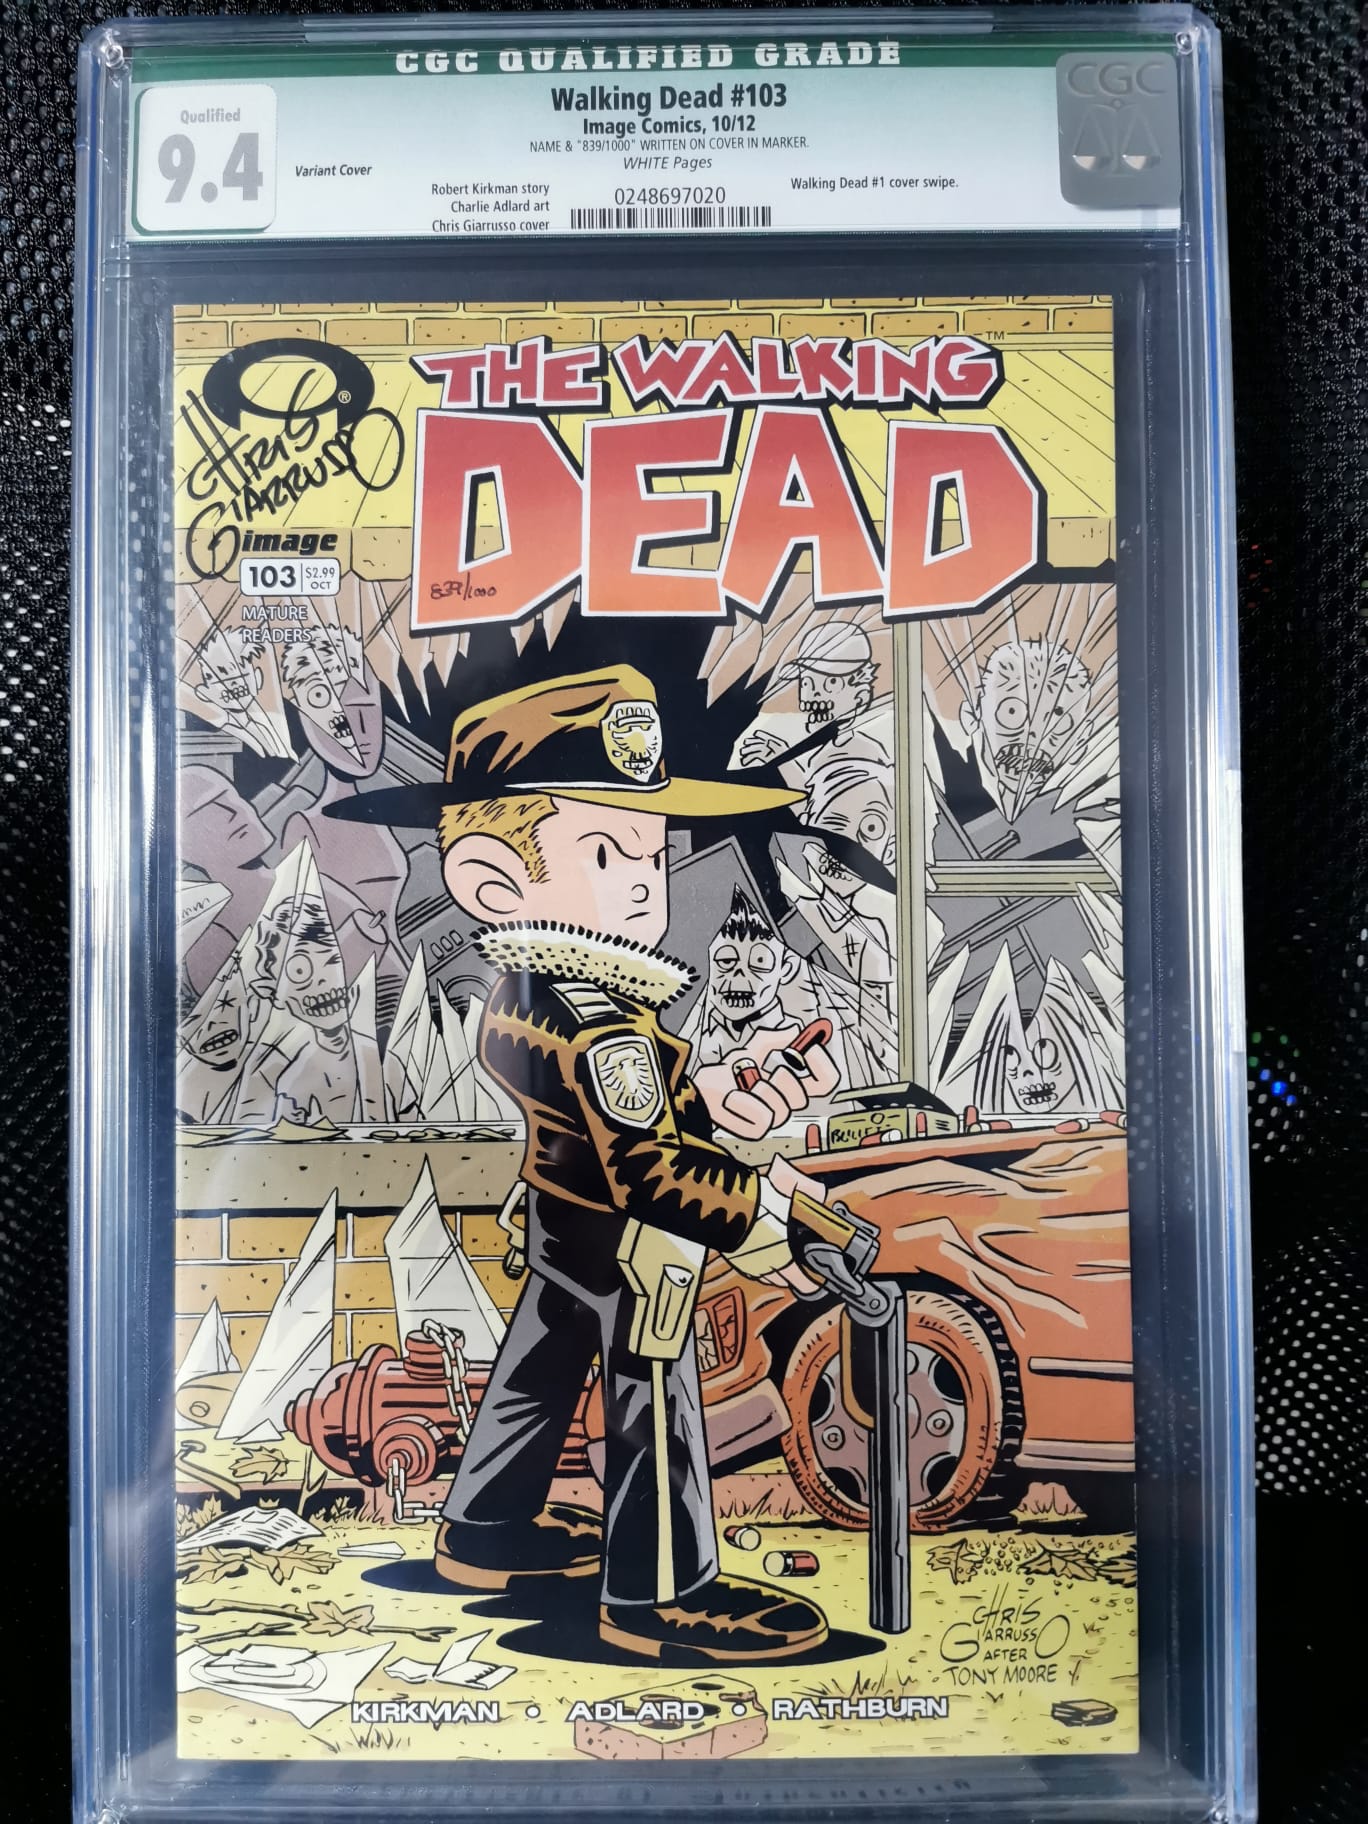 The Walking Dead #103 Variant Giarrusso CGC 9.4